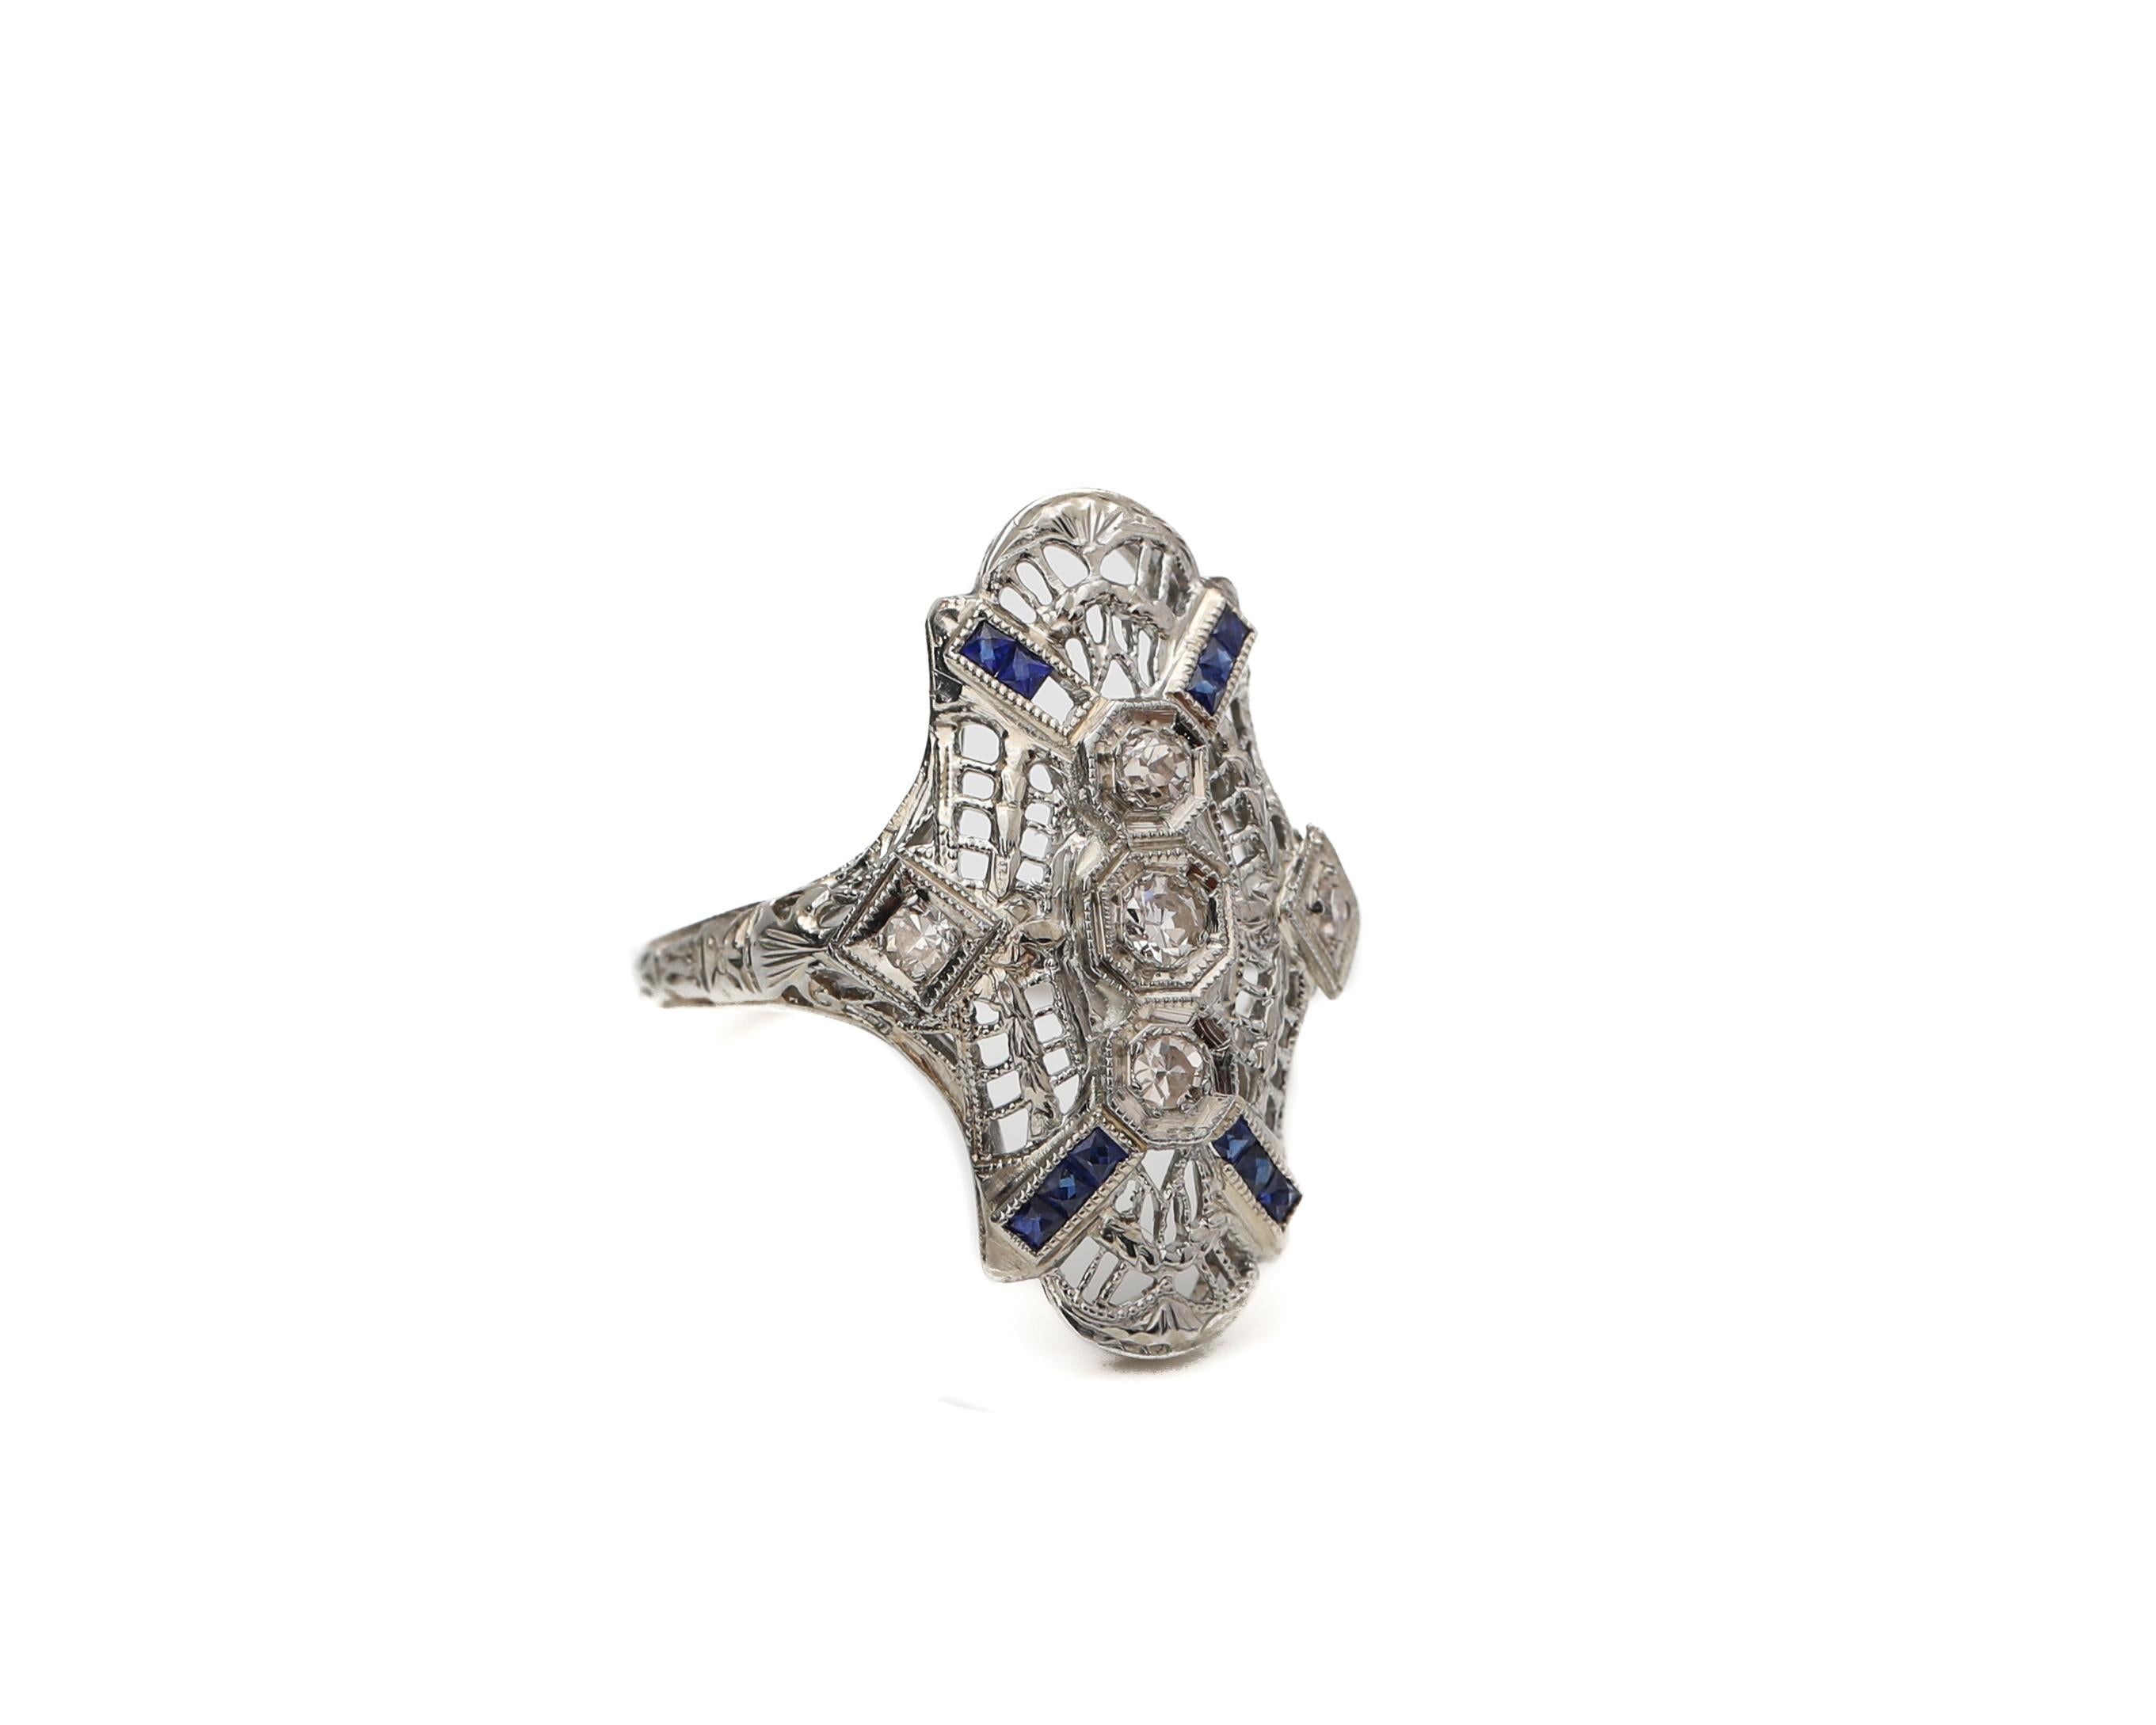 Description: 
Here we have a lovely example of an Art Deco Shield Ring. This beauty has a beautiful filigree design accented with diamonds and sapphires. This classic beauty would make a lovely addition to any vintage lover's collection!

This is a